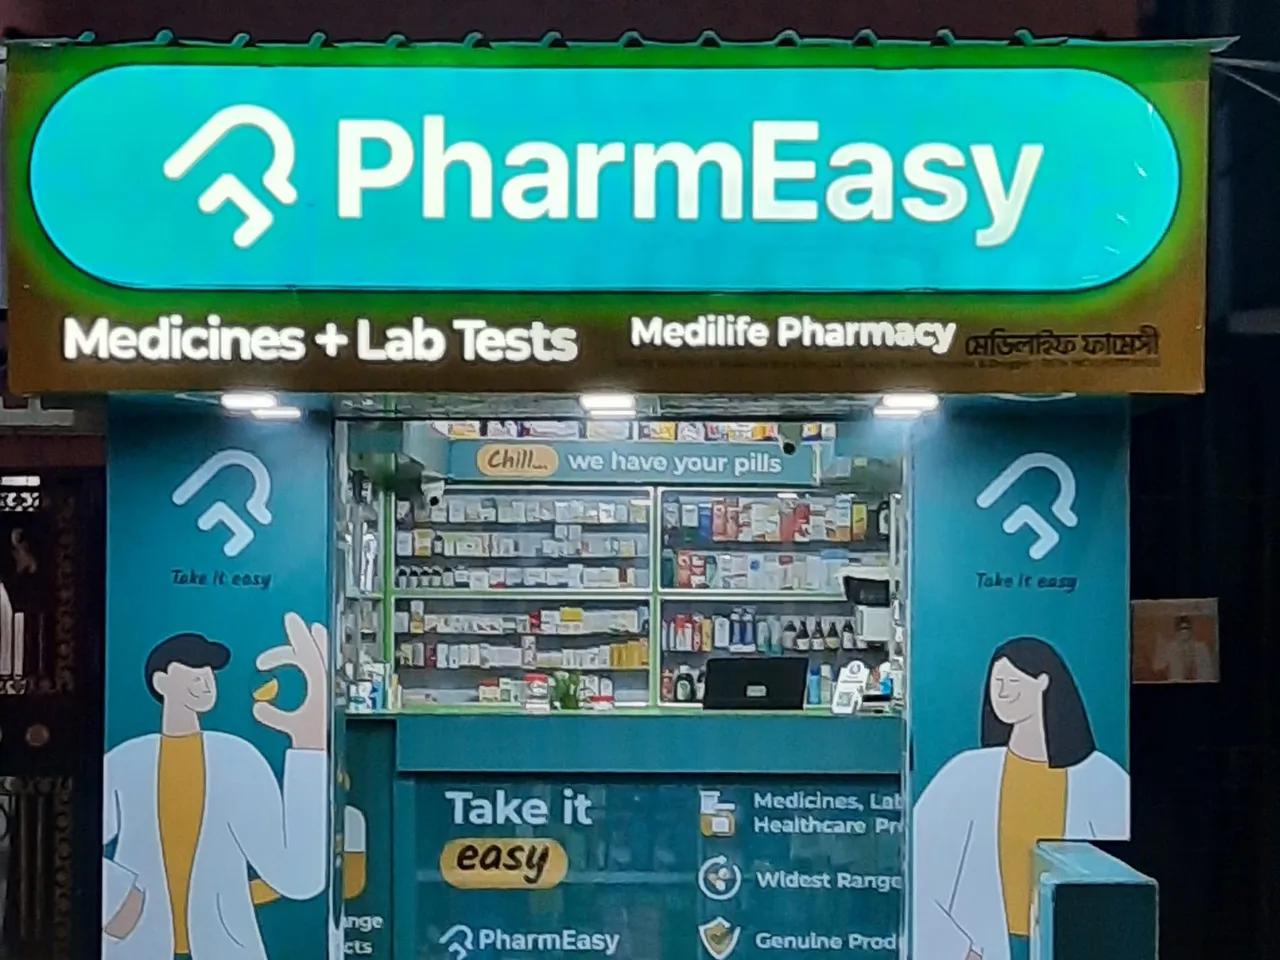 Cash-strapped Pharmeasy to raise Rs 3,500Cr via rights issue to repay loan to Goldman Sachs: Report